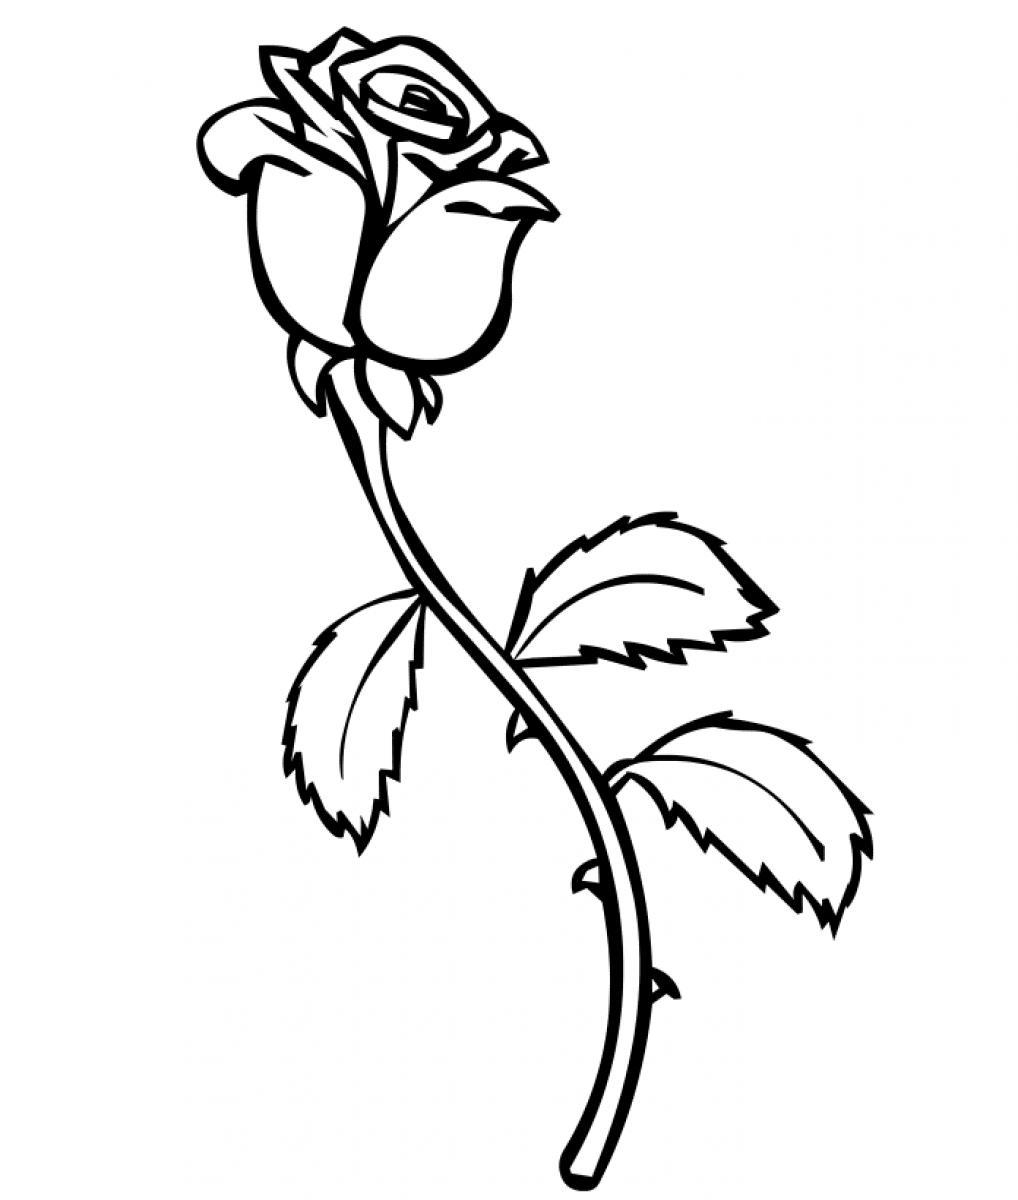 Coloring Pages Of Crosses With Flowers Coloring Pages For Kids Roses Printable Coloring Page For Kids